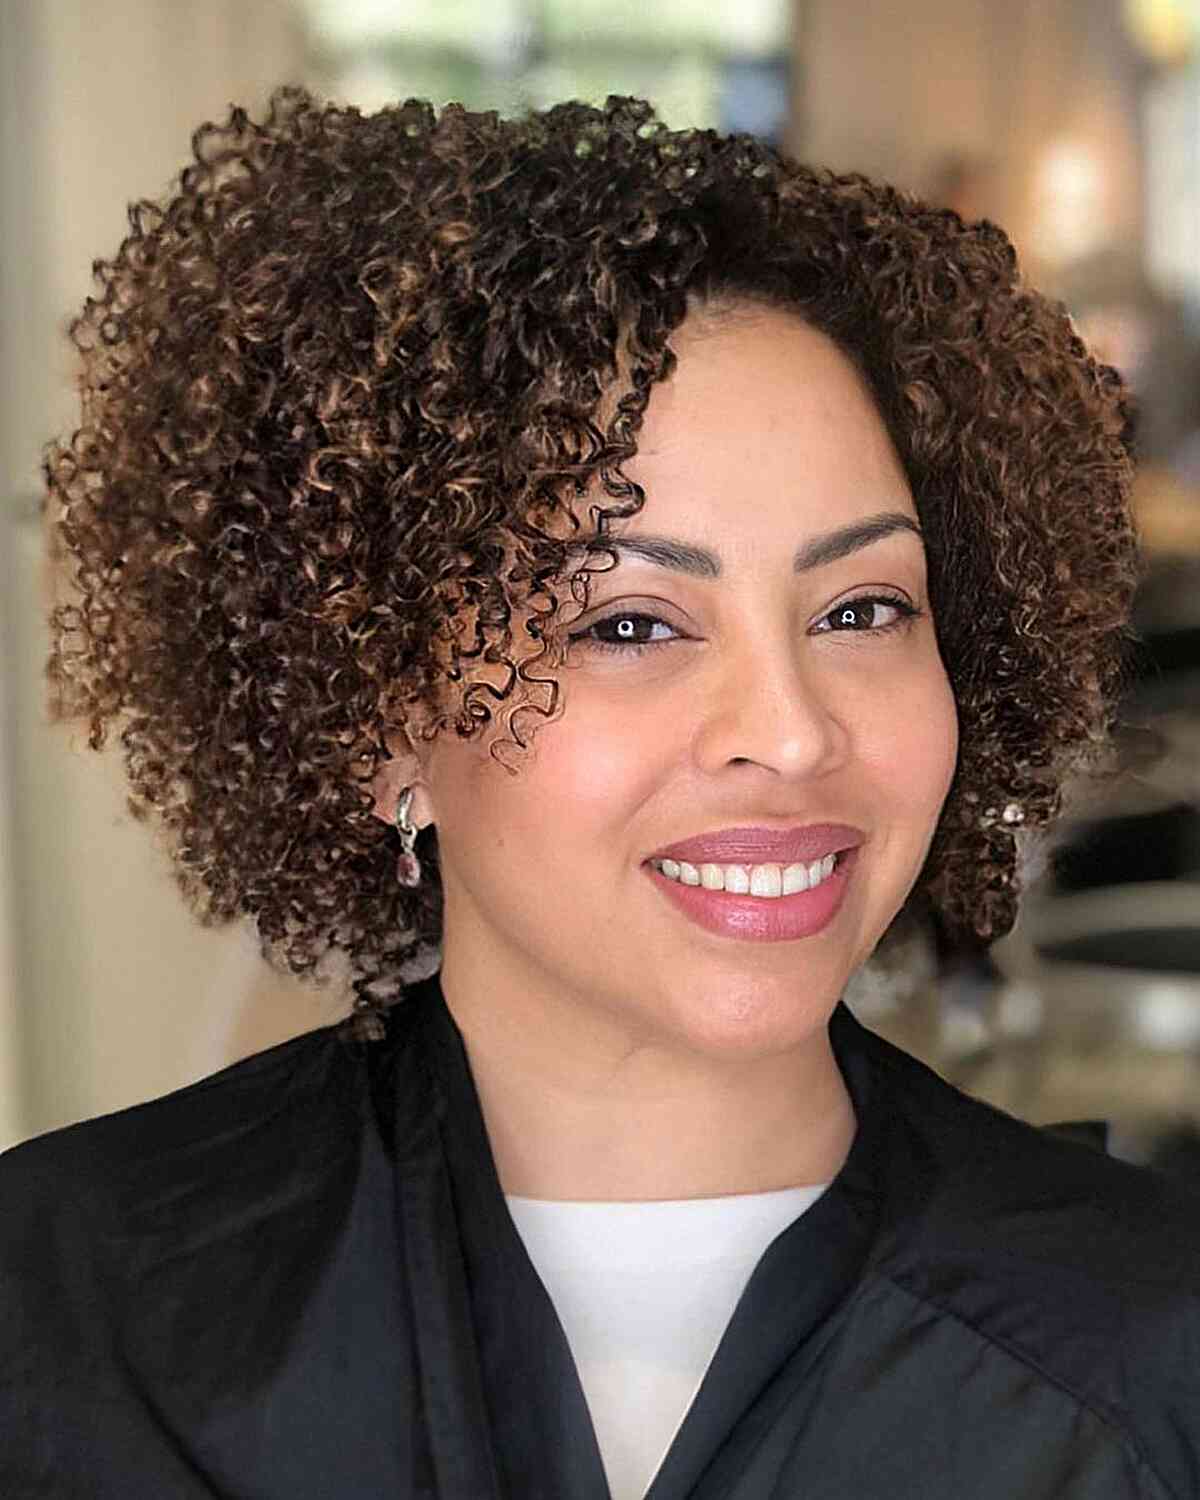 Short Curly Bob Cut for Older Women with Fuller Face Shapes